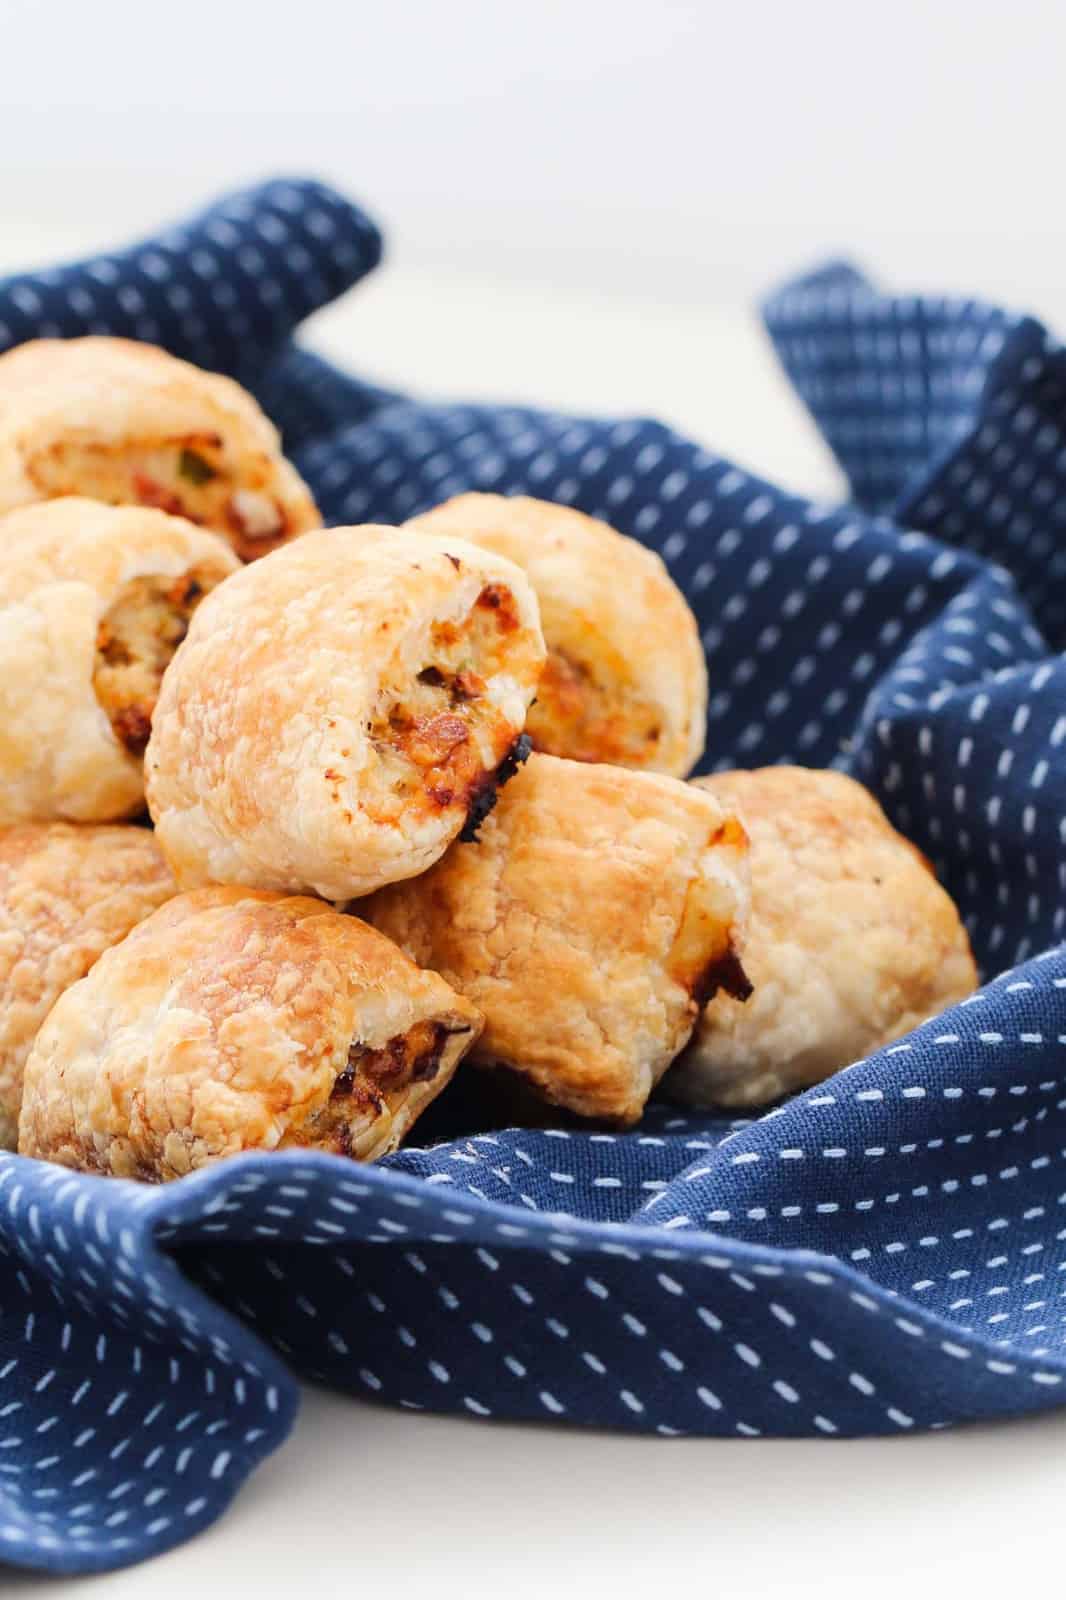 A batch of golden chicken, cheese and bacon sausage rolls piled on a blue tea towel.